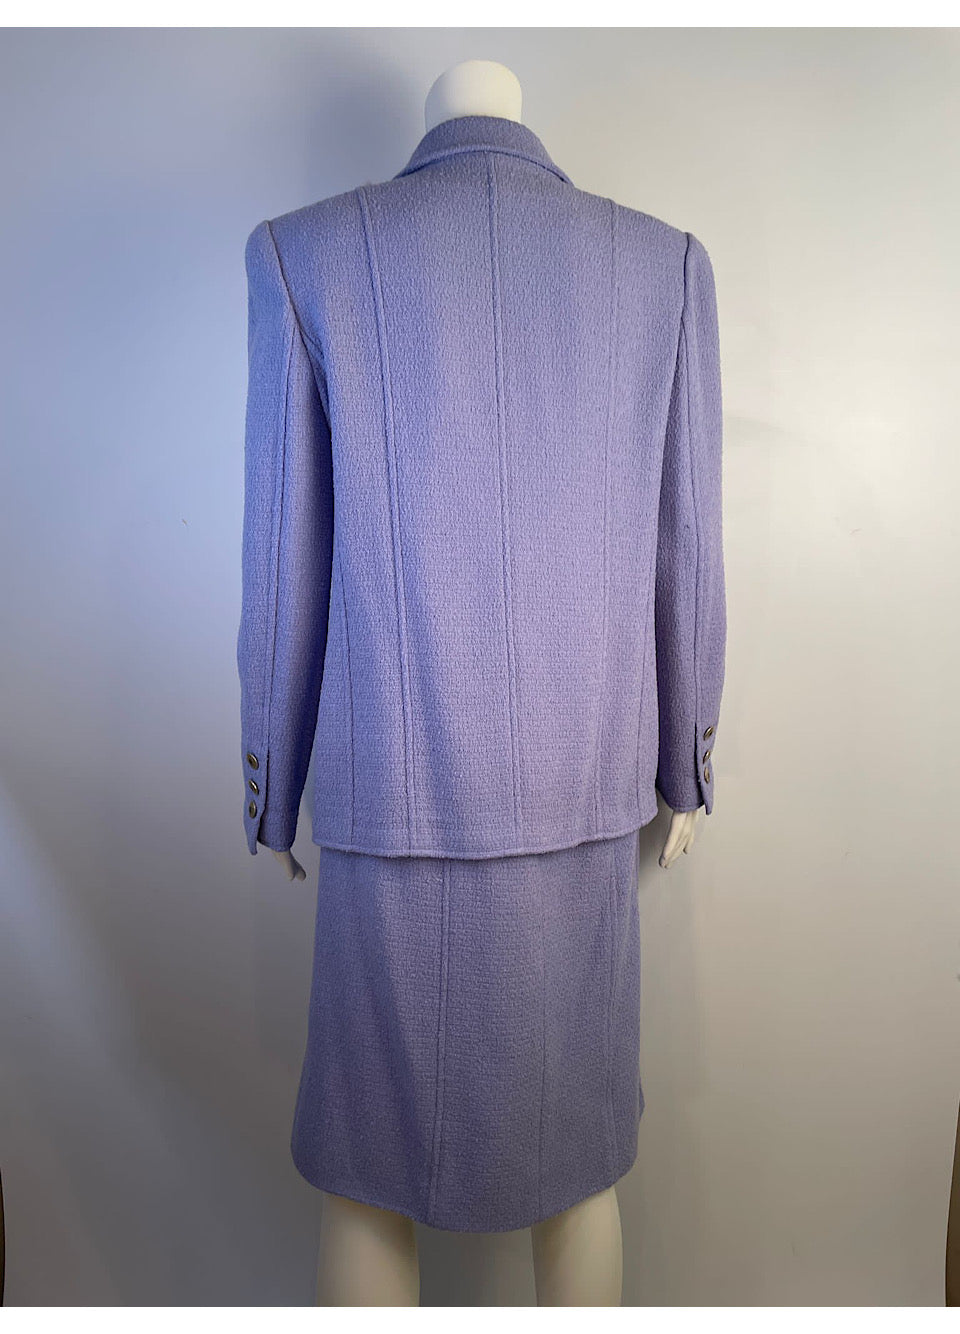 HelensChanel Rare Chanel 98P 1998 Spring Vintage Lilac Double Breasted Jacket Skirt Suit FR 44 US 10